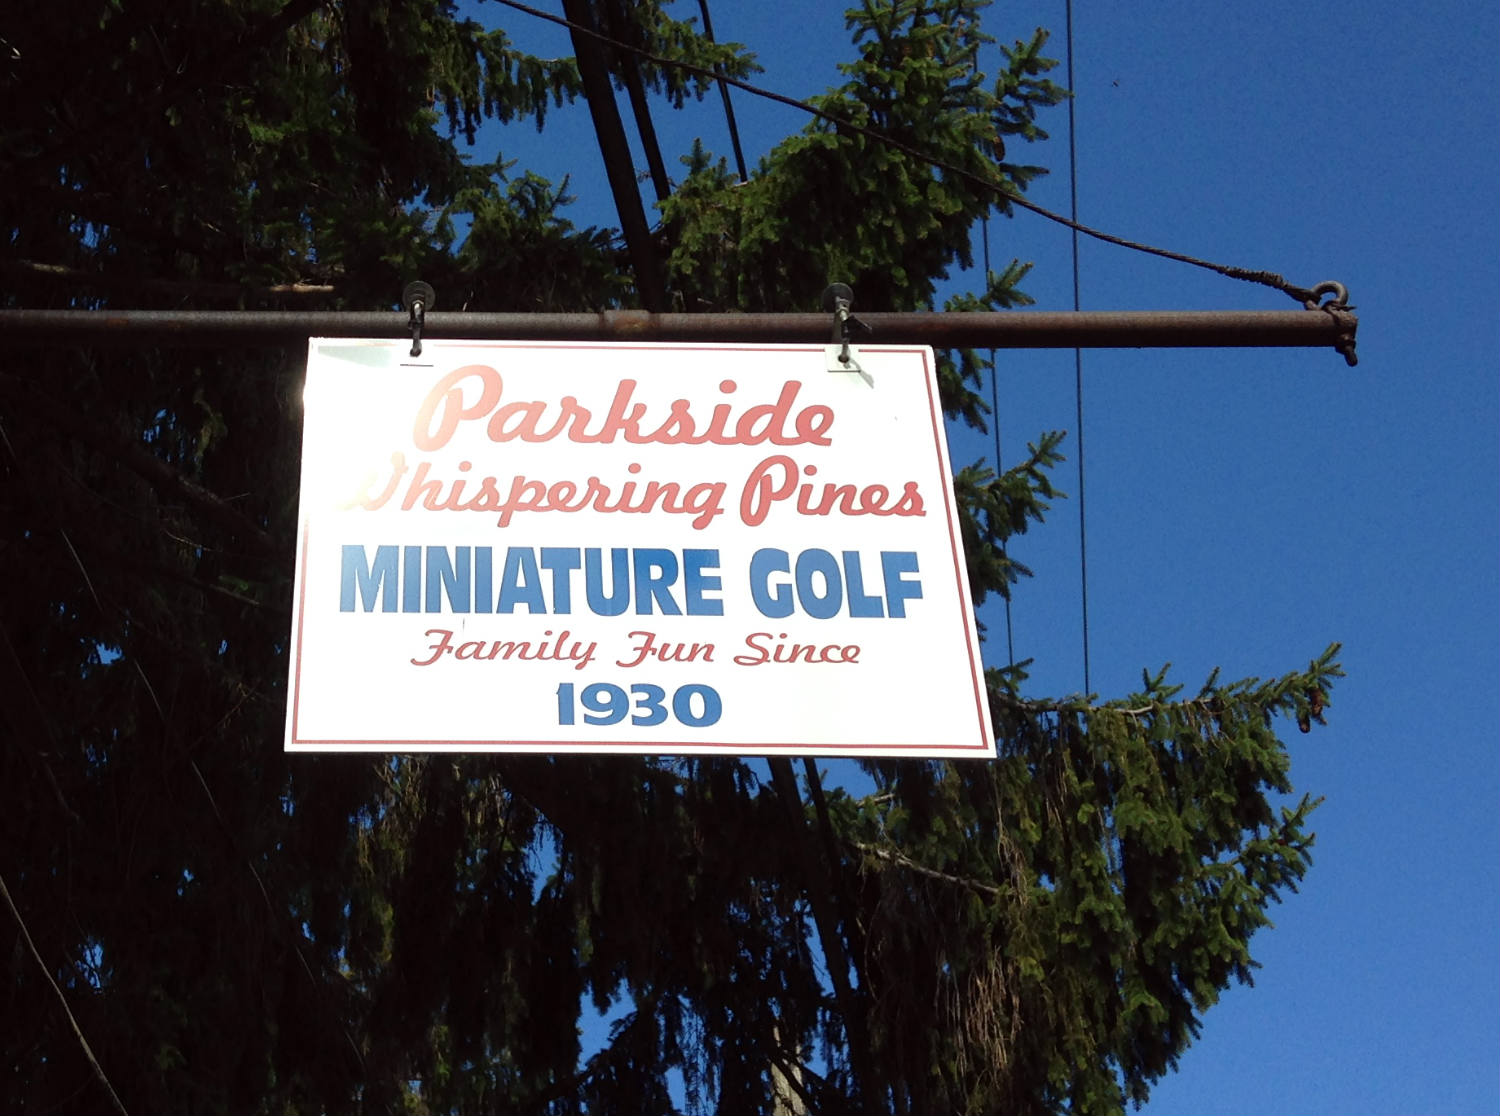 Whispering Pines Miniature Golf Sign Rochester, NY